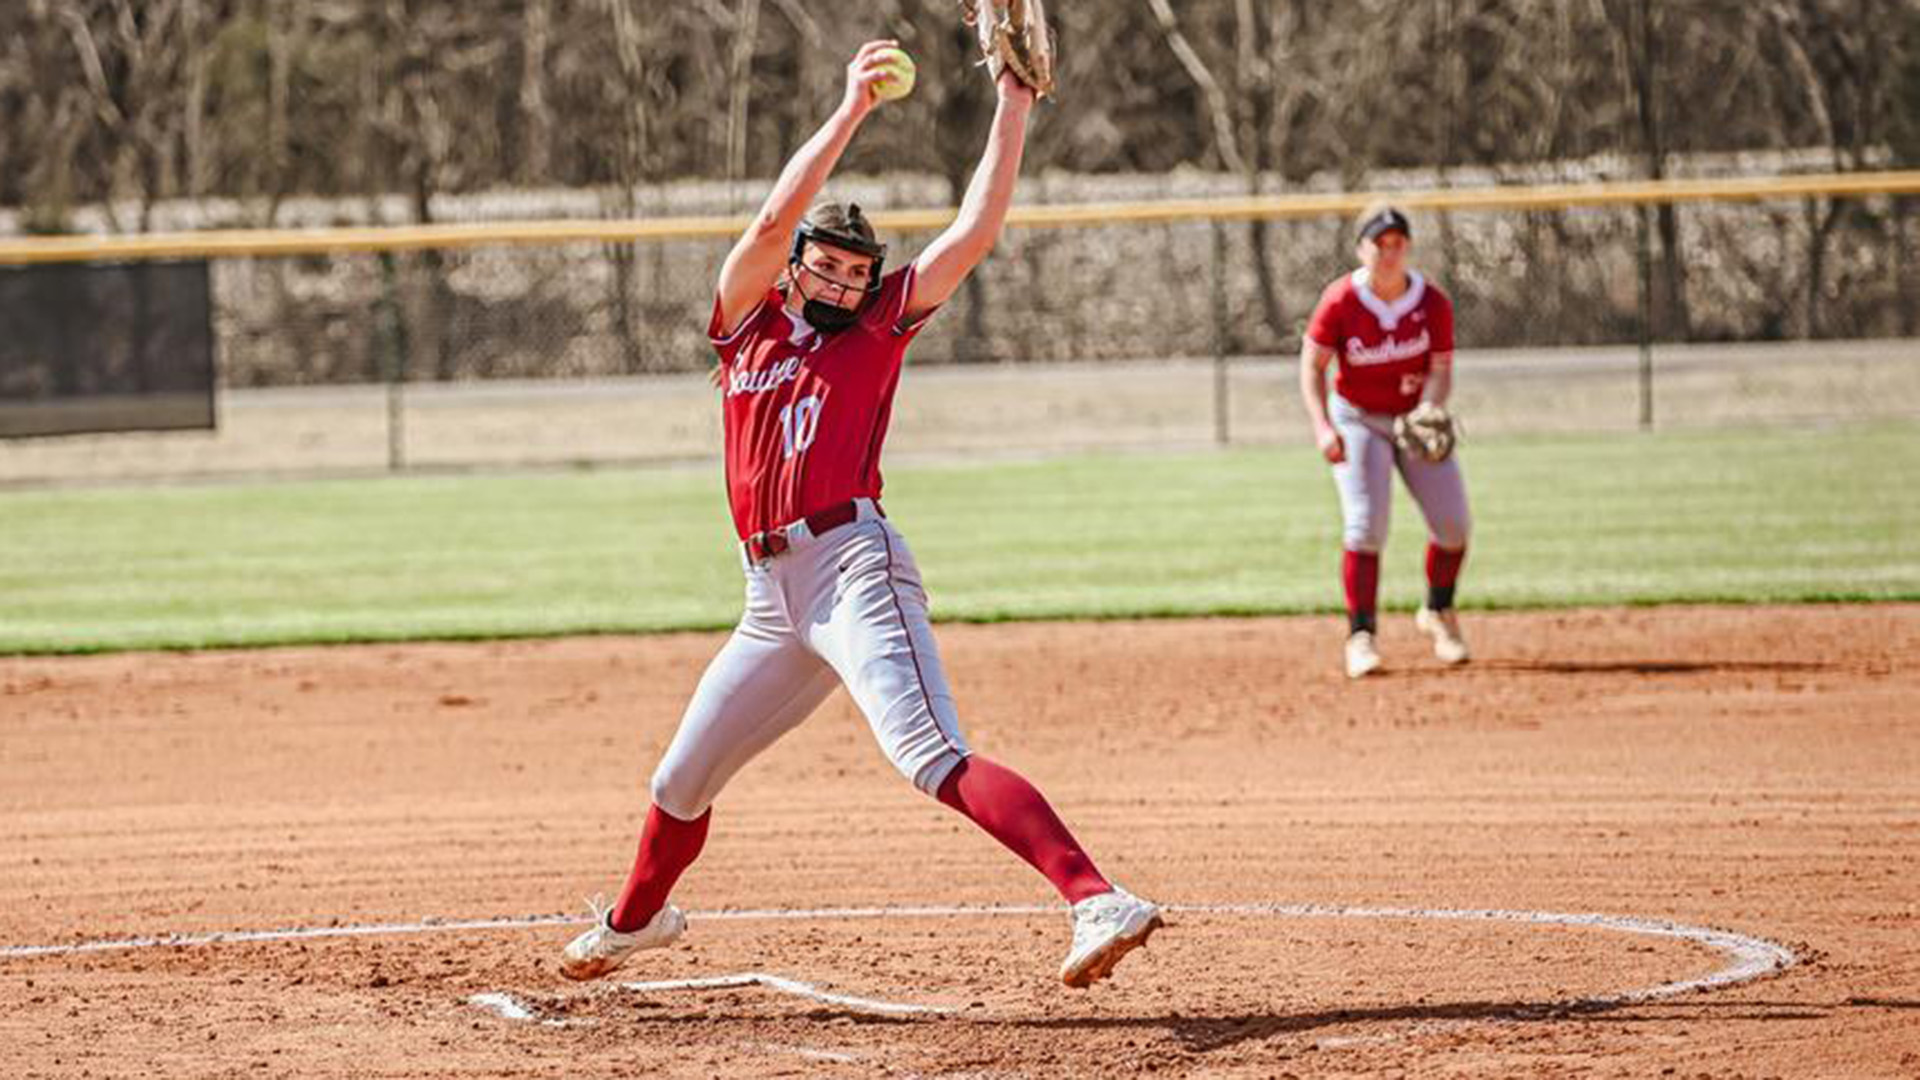 Wathen picked for RSC Softball Pitcher of the Week